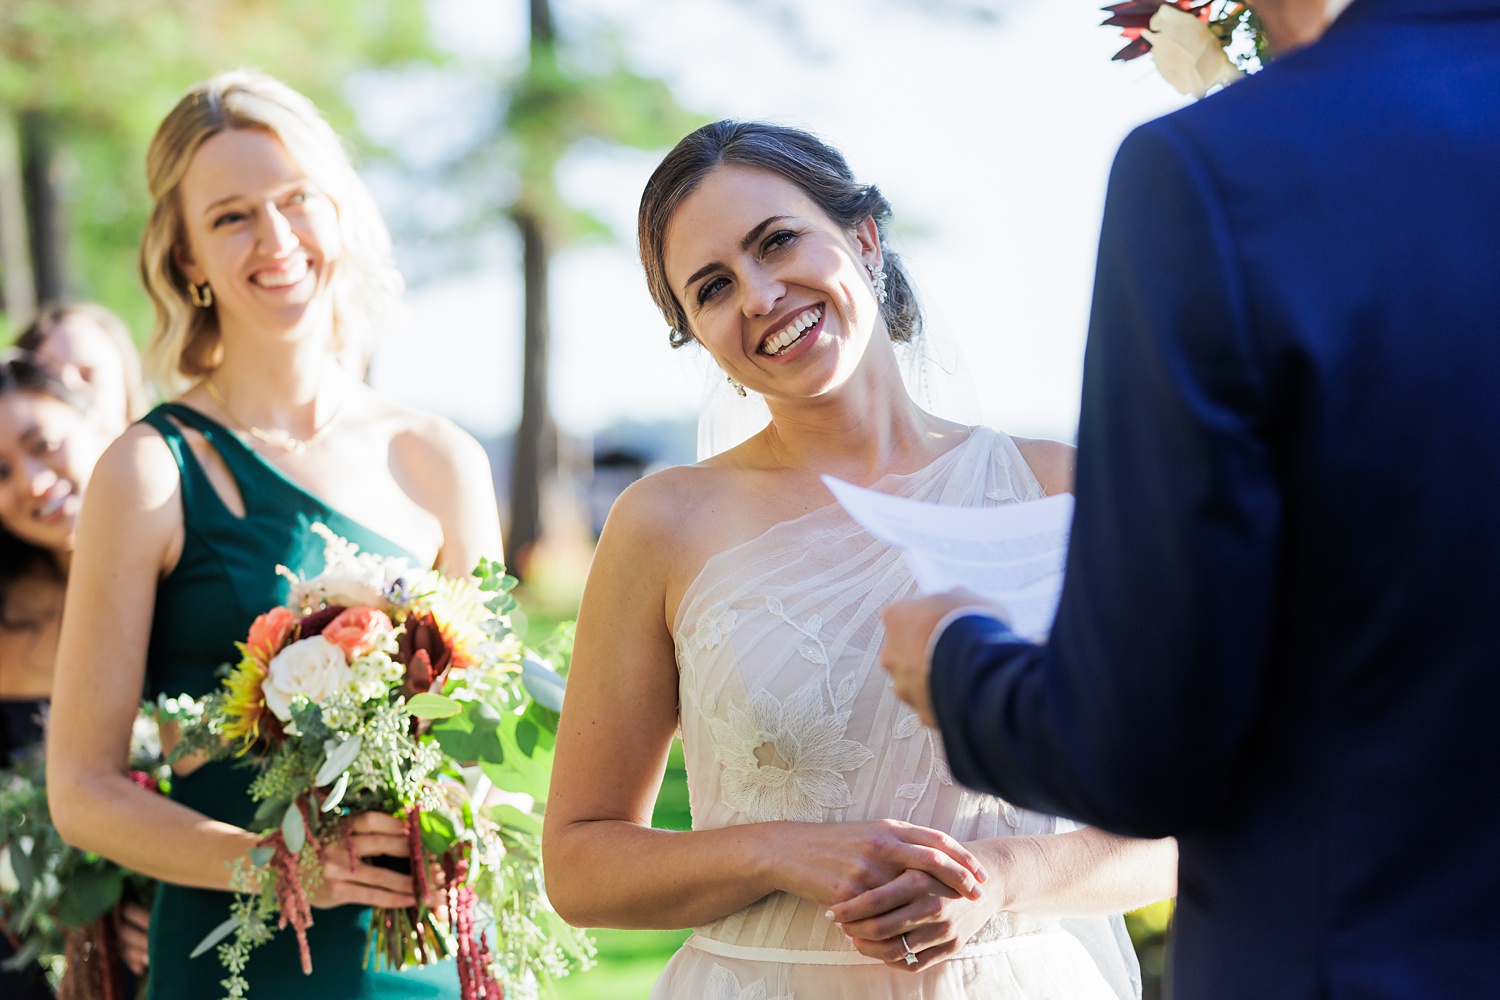 The bride smiles warmly at her husband during the wedding ceremony outside on a fall Maine day